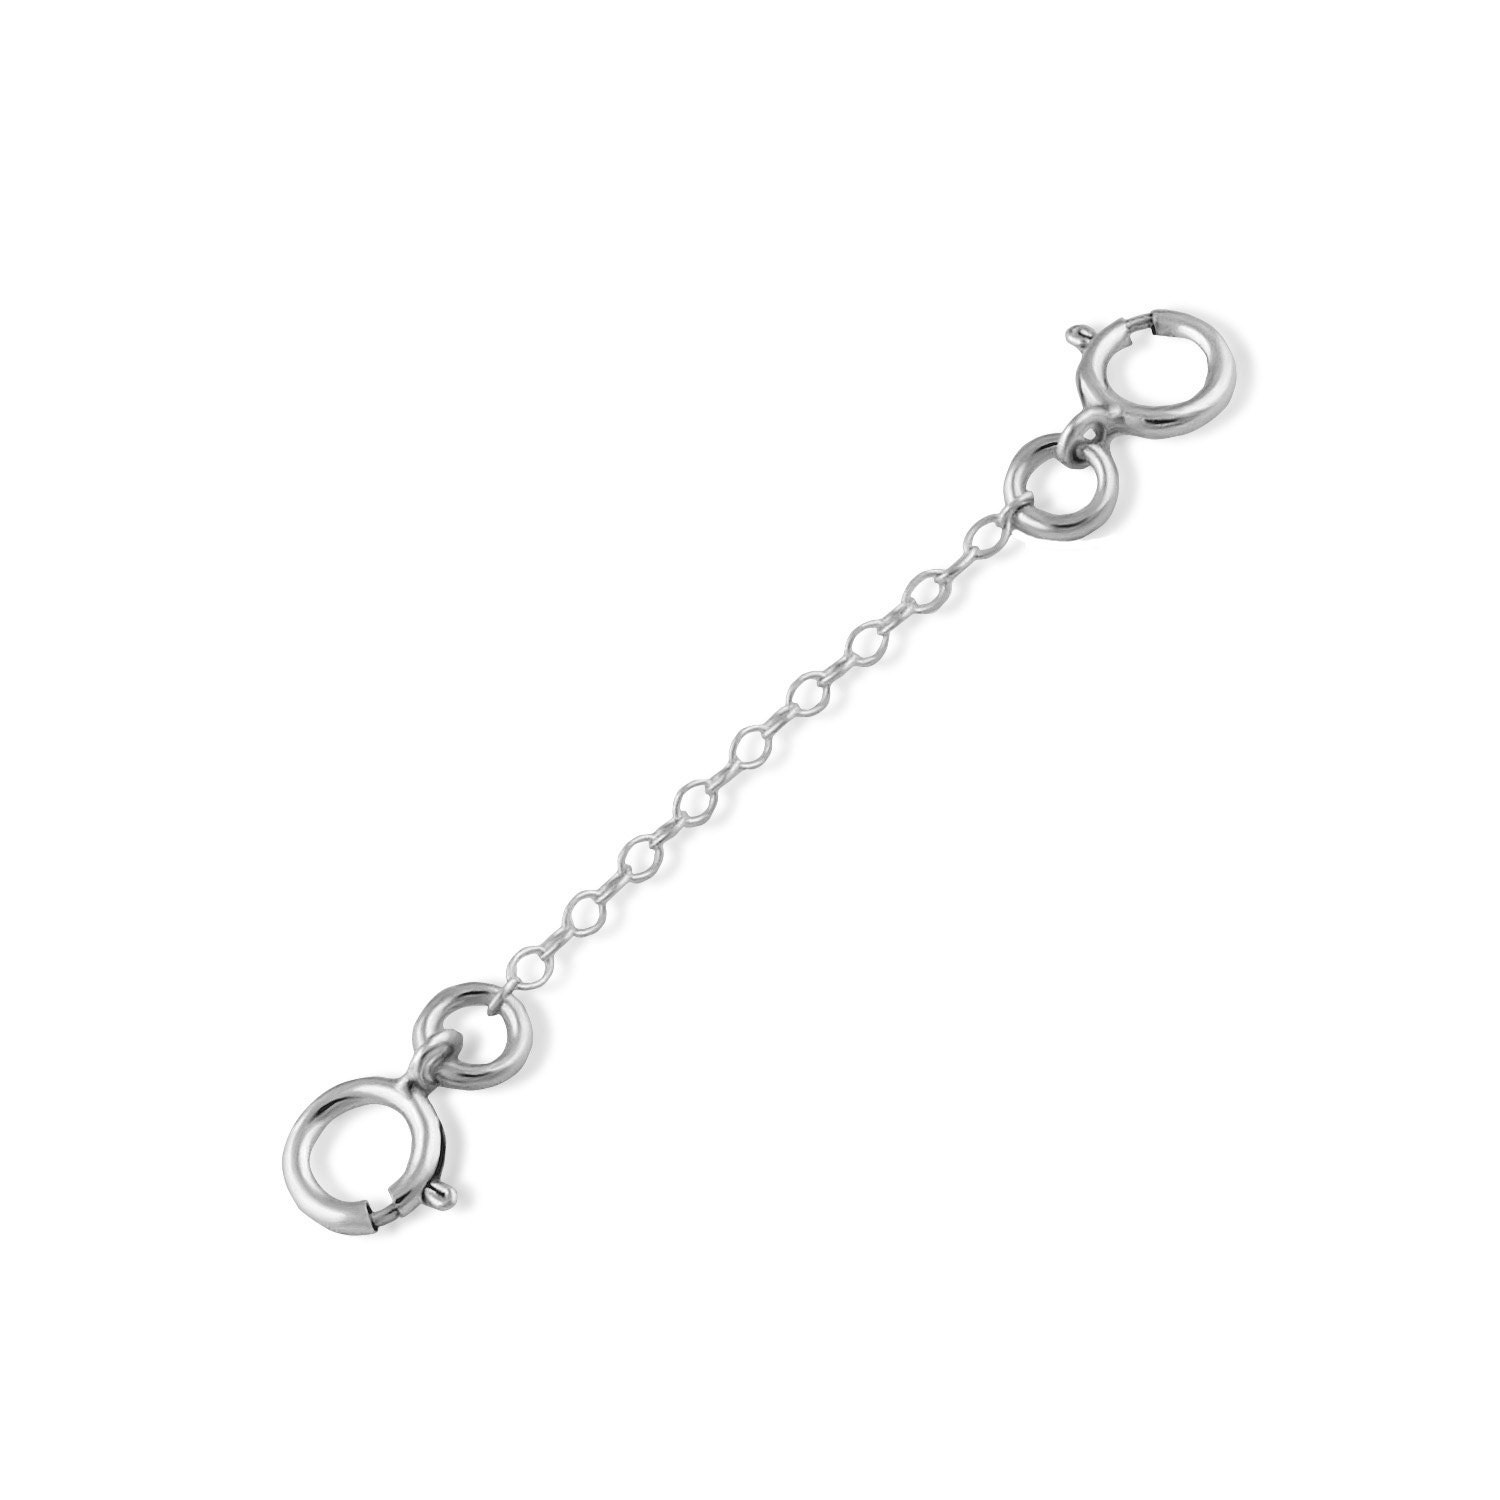  Magnetic Necklace Clasps and Closures, 925 Sterling Silver  Magnetic Clasps for Necklace Bracelet, Silver Strong Double Spring Clasps  for Jewelry Making Supplies Chain Connector Necklace Extender